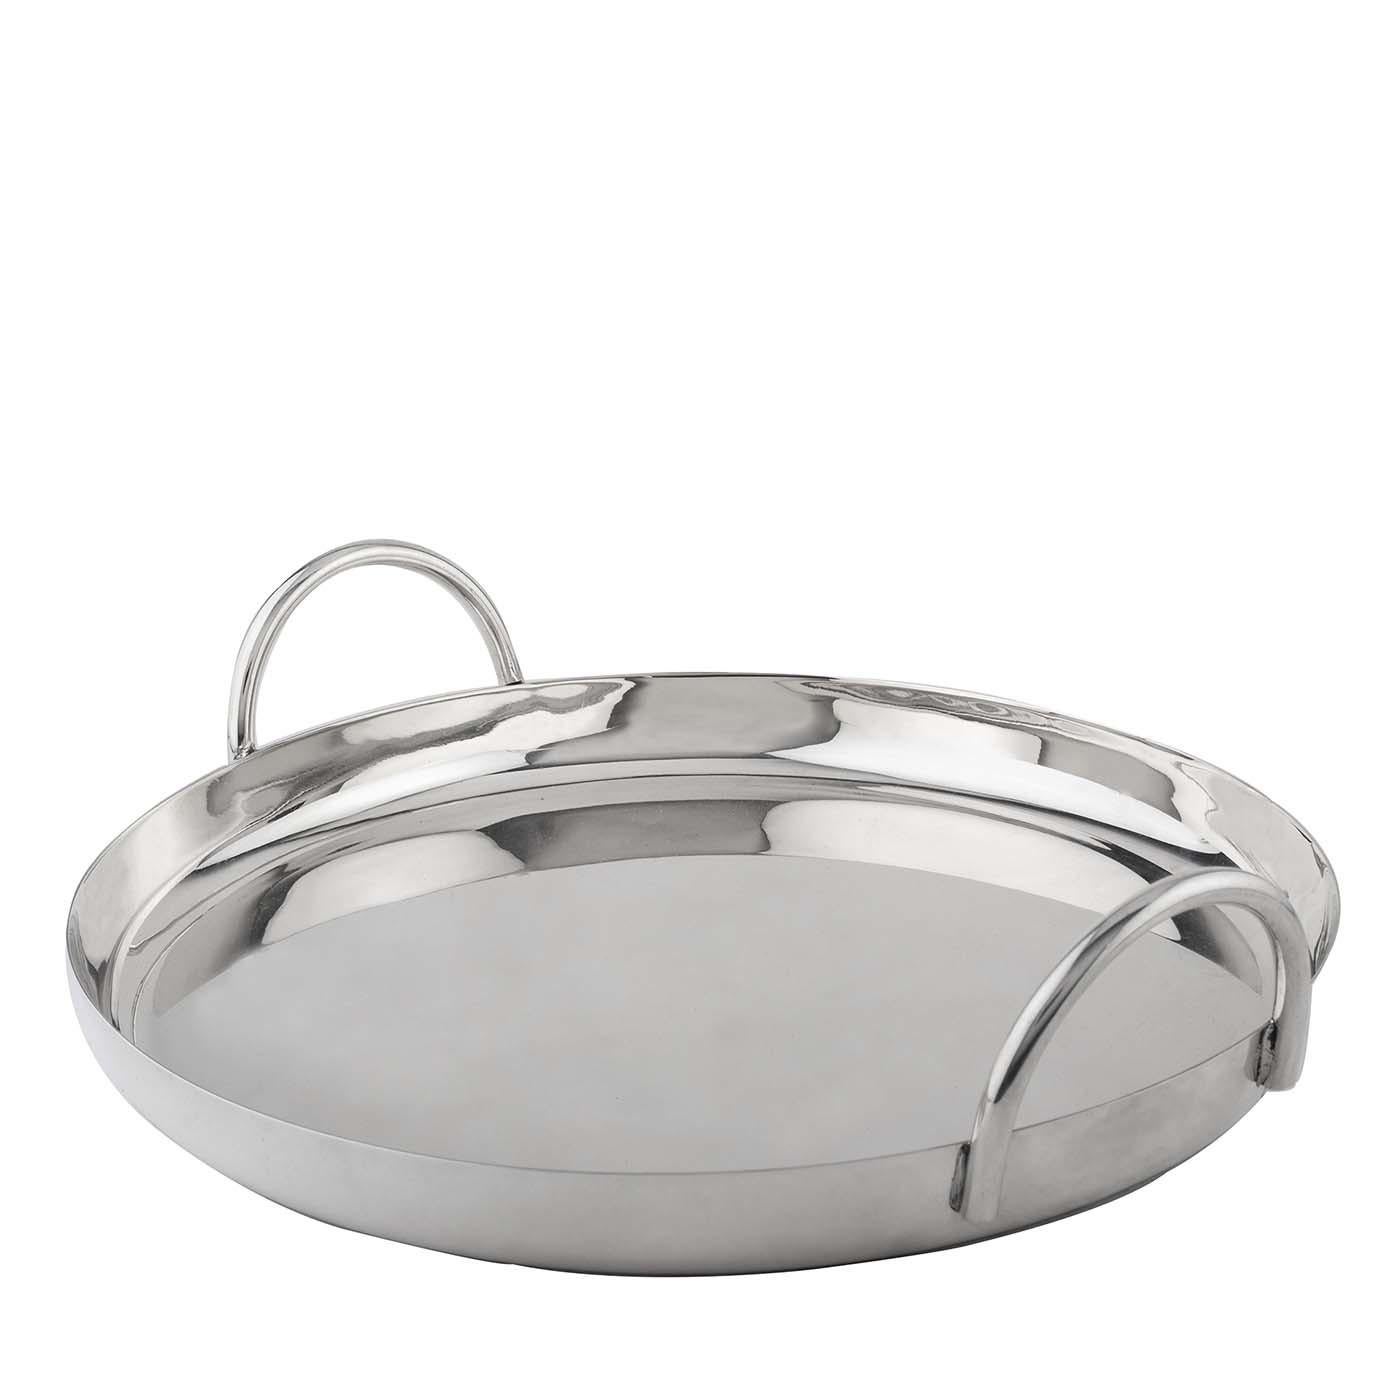 Stunning in its simplicity, this tray's elegant and Classic design is ideal for serving hors d'oeuvres and drinks during parties and festive gatherings. Handmade of 925 silver, it features a tray with a diameter of 27 cm completed with a raised